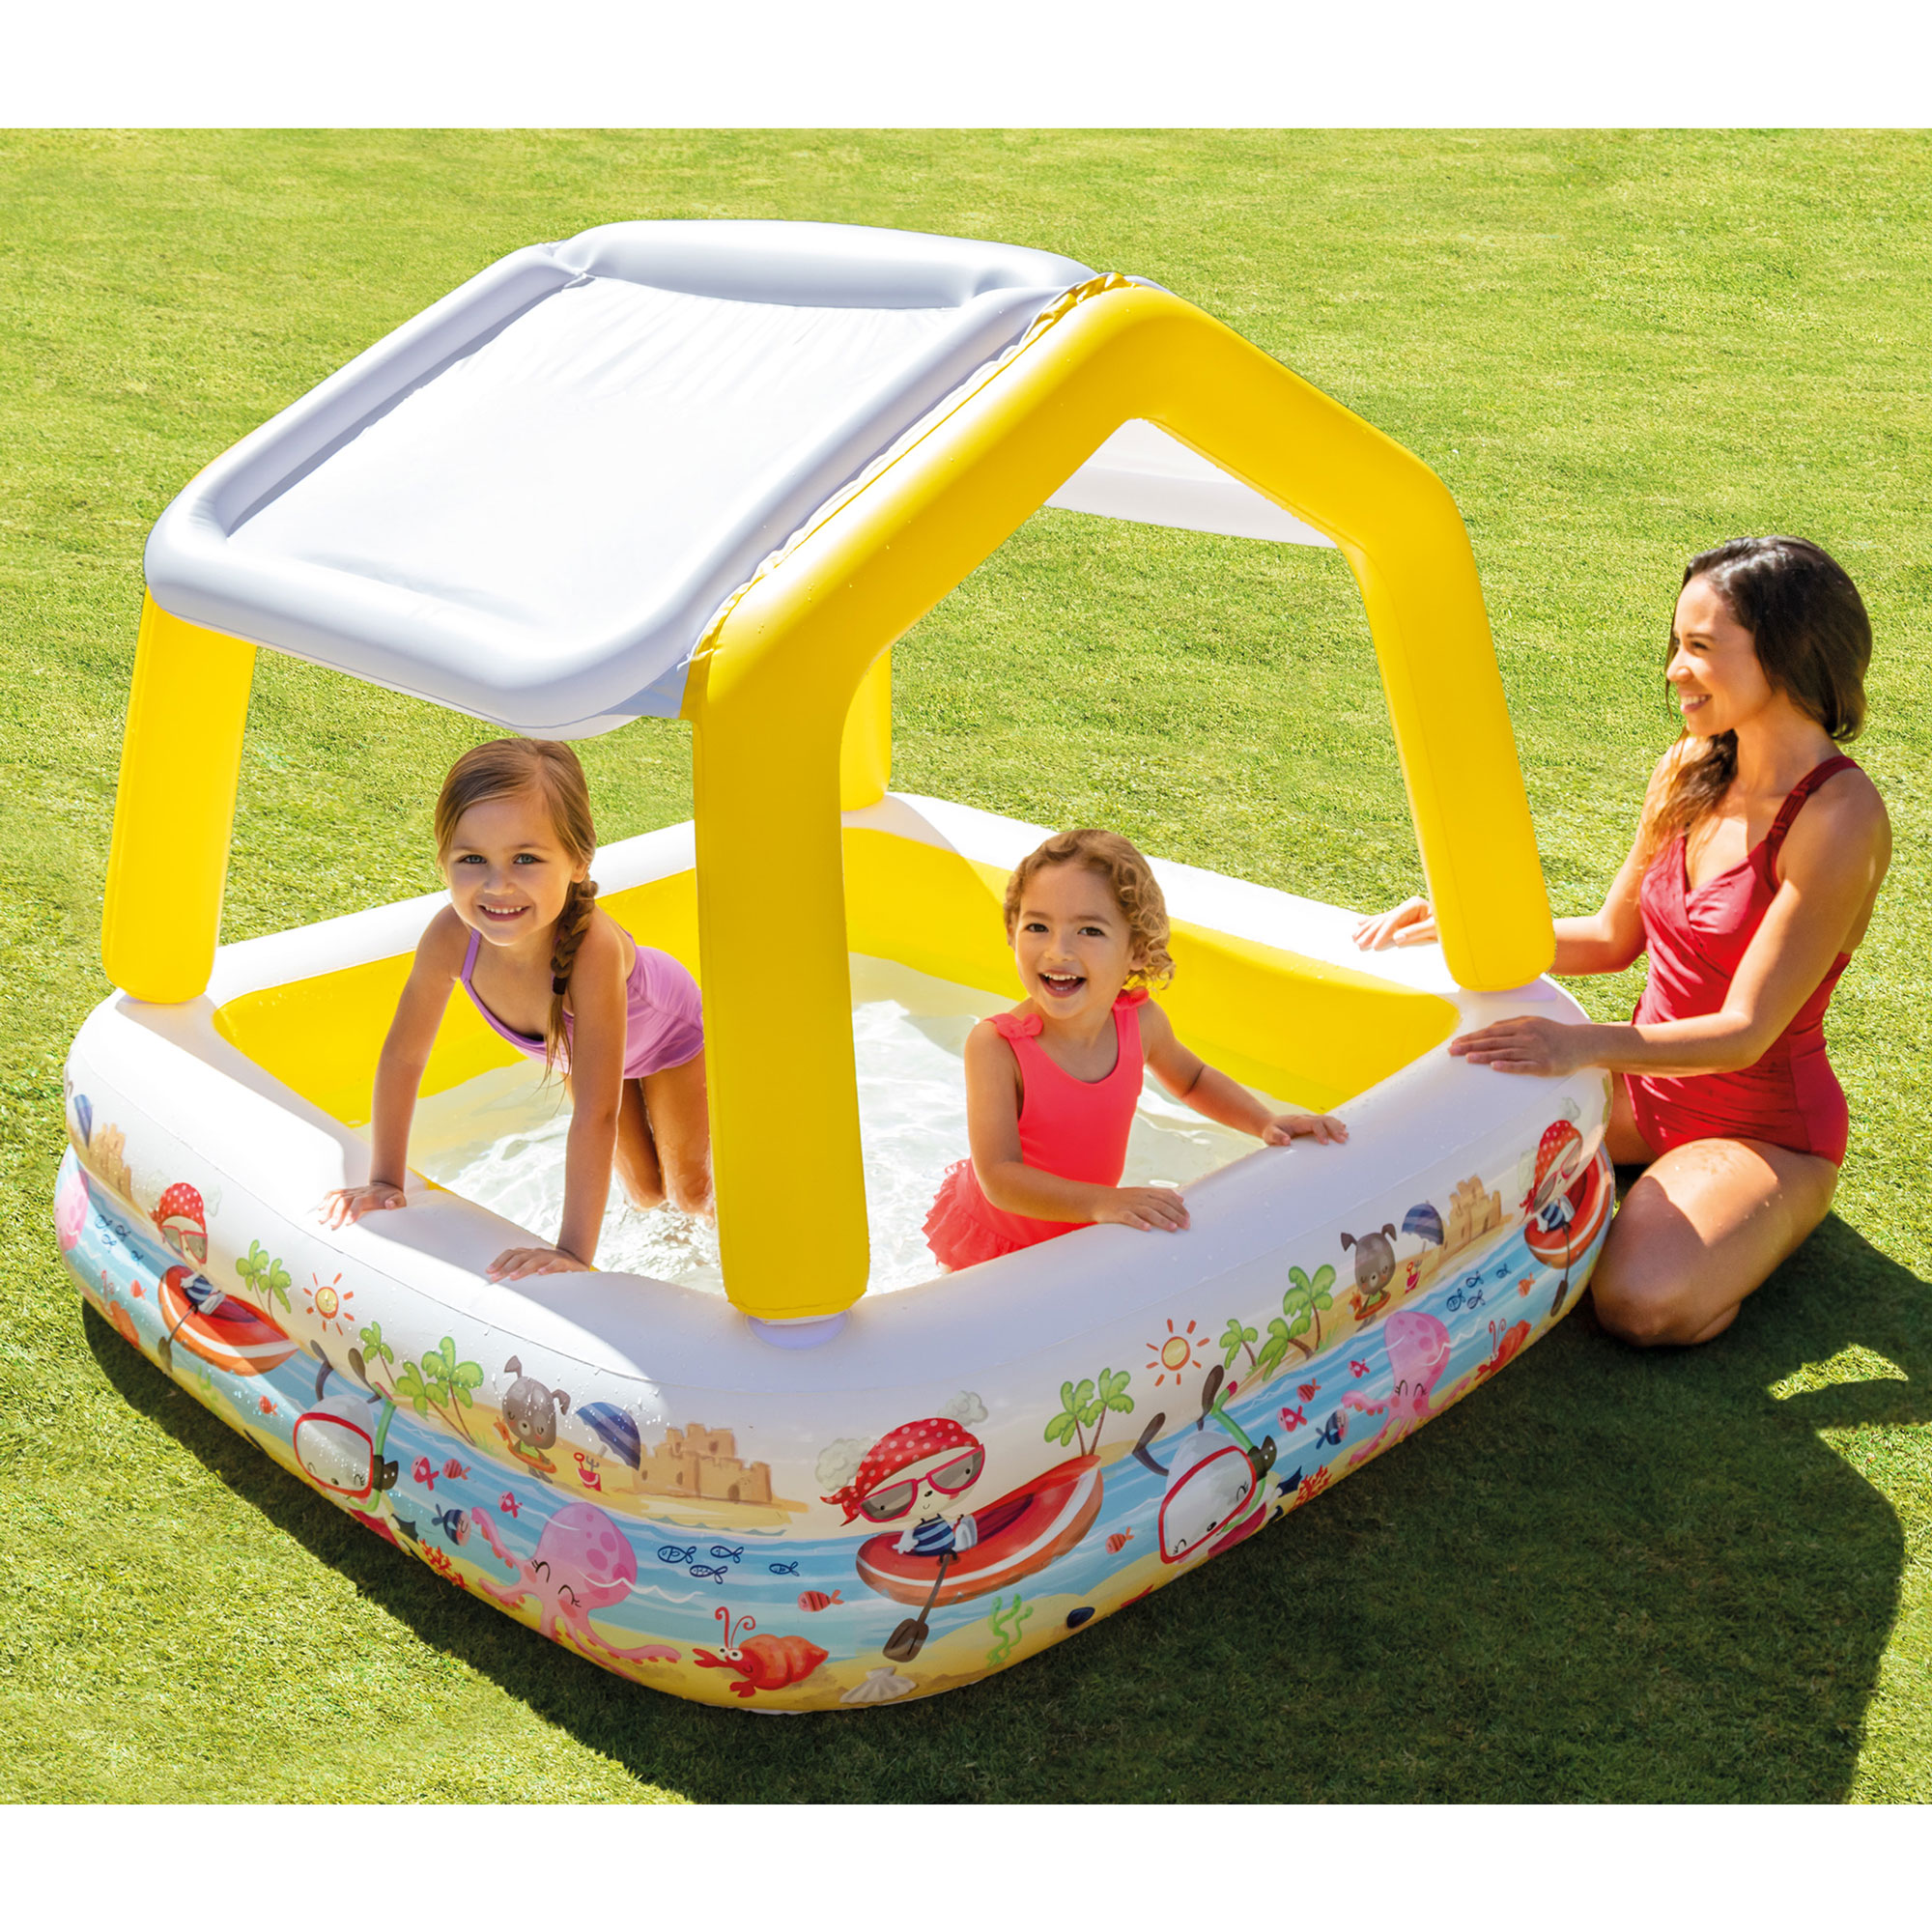 Intex 5ft x 48in Inflatable Ocean Scene Sun Shade Kids Pool With Canopy - image 11 of 12